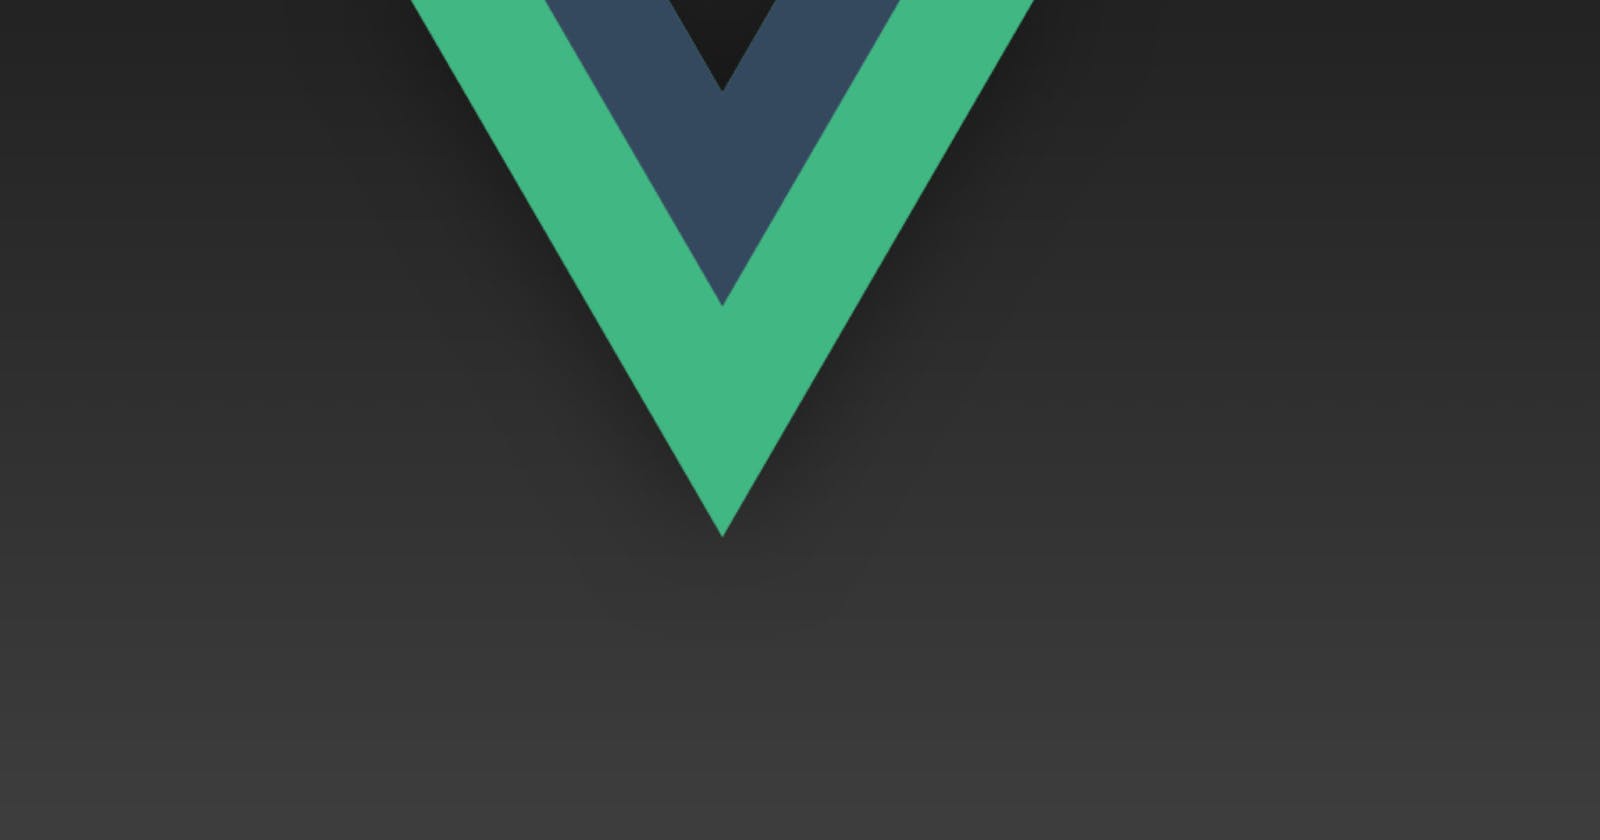 Ask anything to Vue.js Team